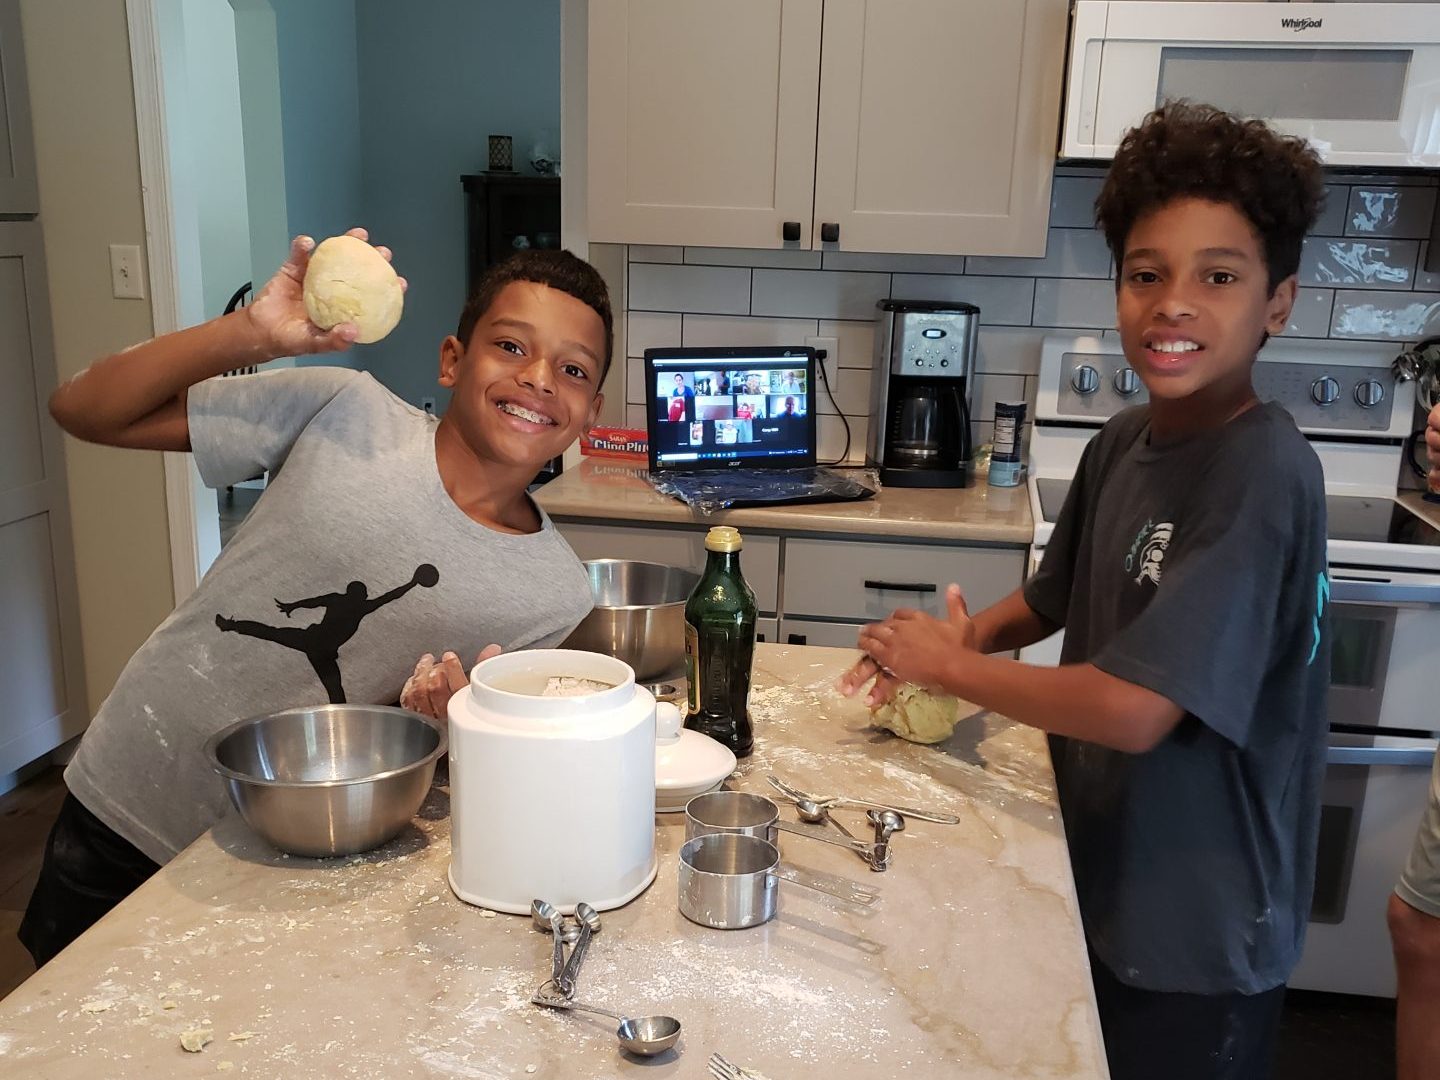 Siblings learning how to cook during virtual RMC